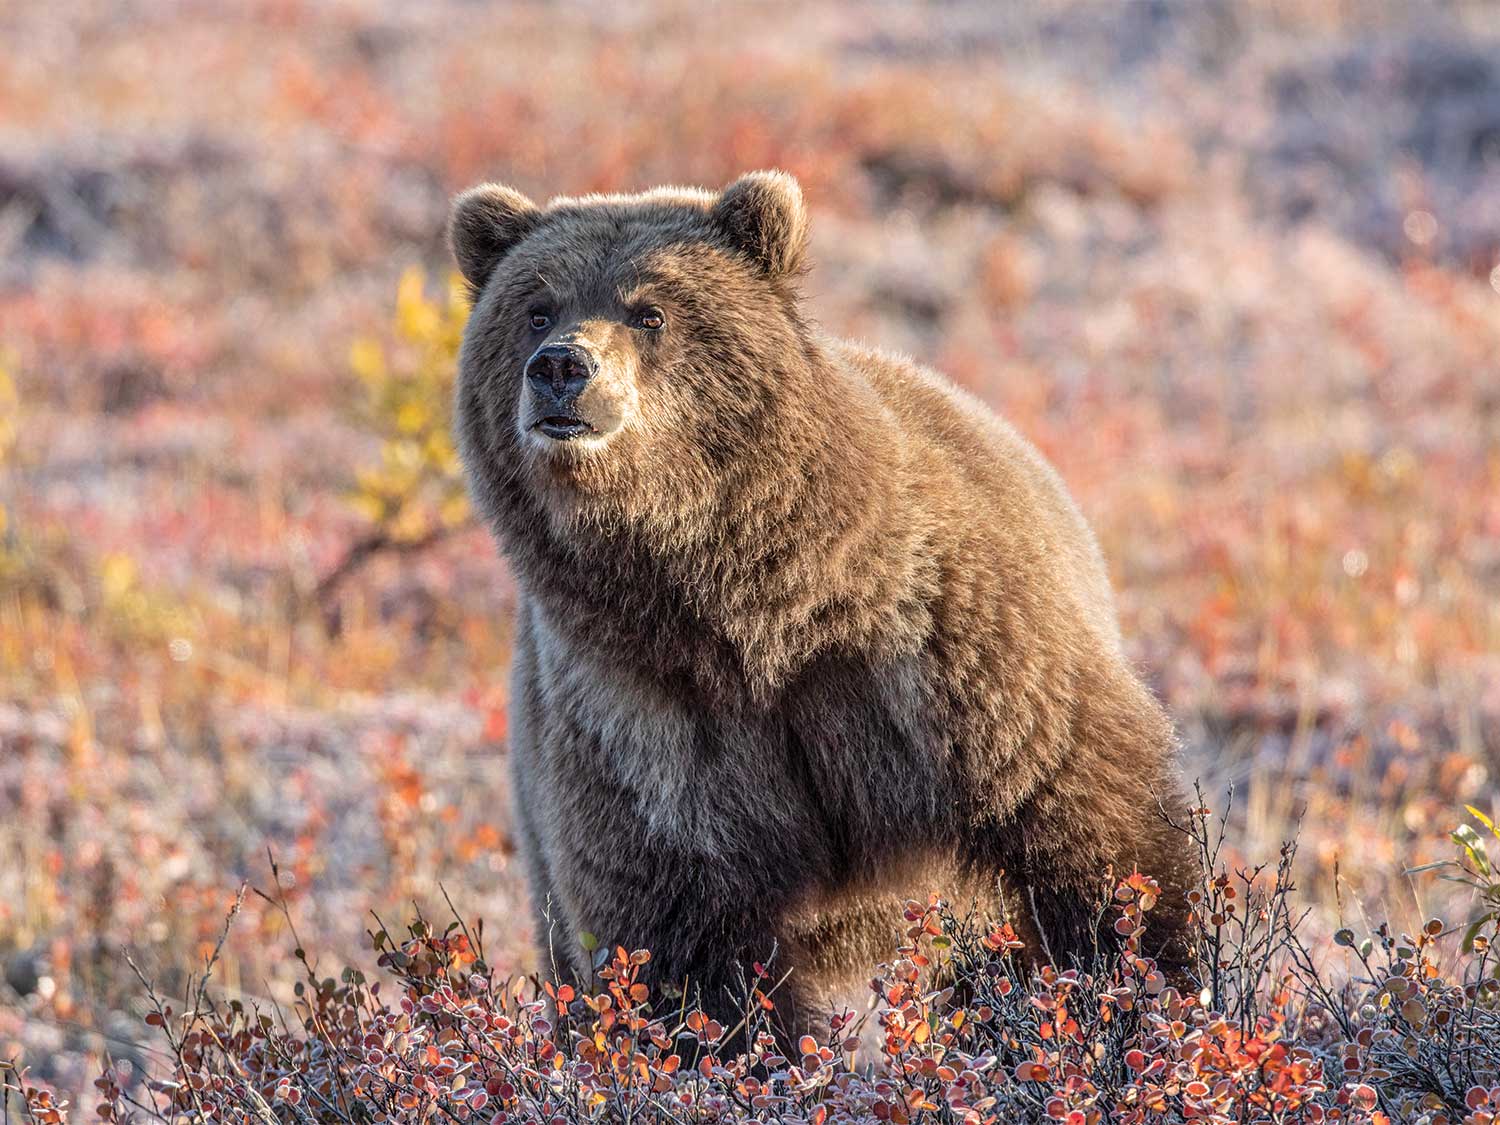 "How to Pick the Right Sidearm for Backup Bear Protection" by Will Brantley, Bryce M. Towsley, Tyler Freel, and John B. Snow